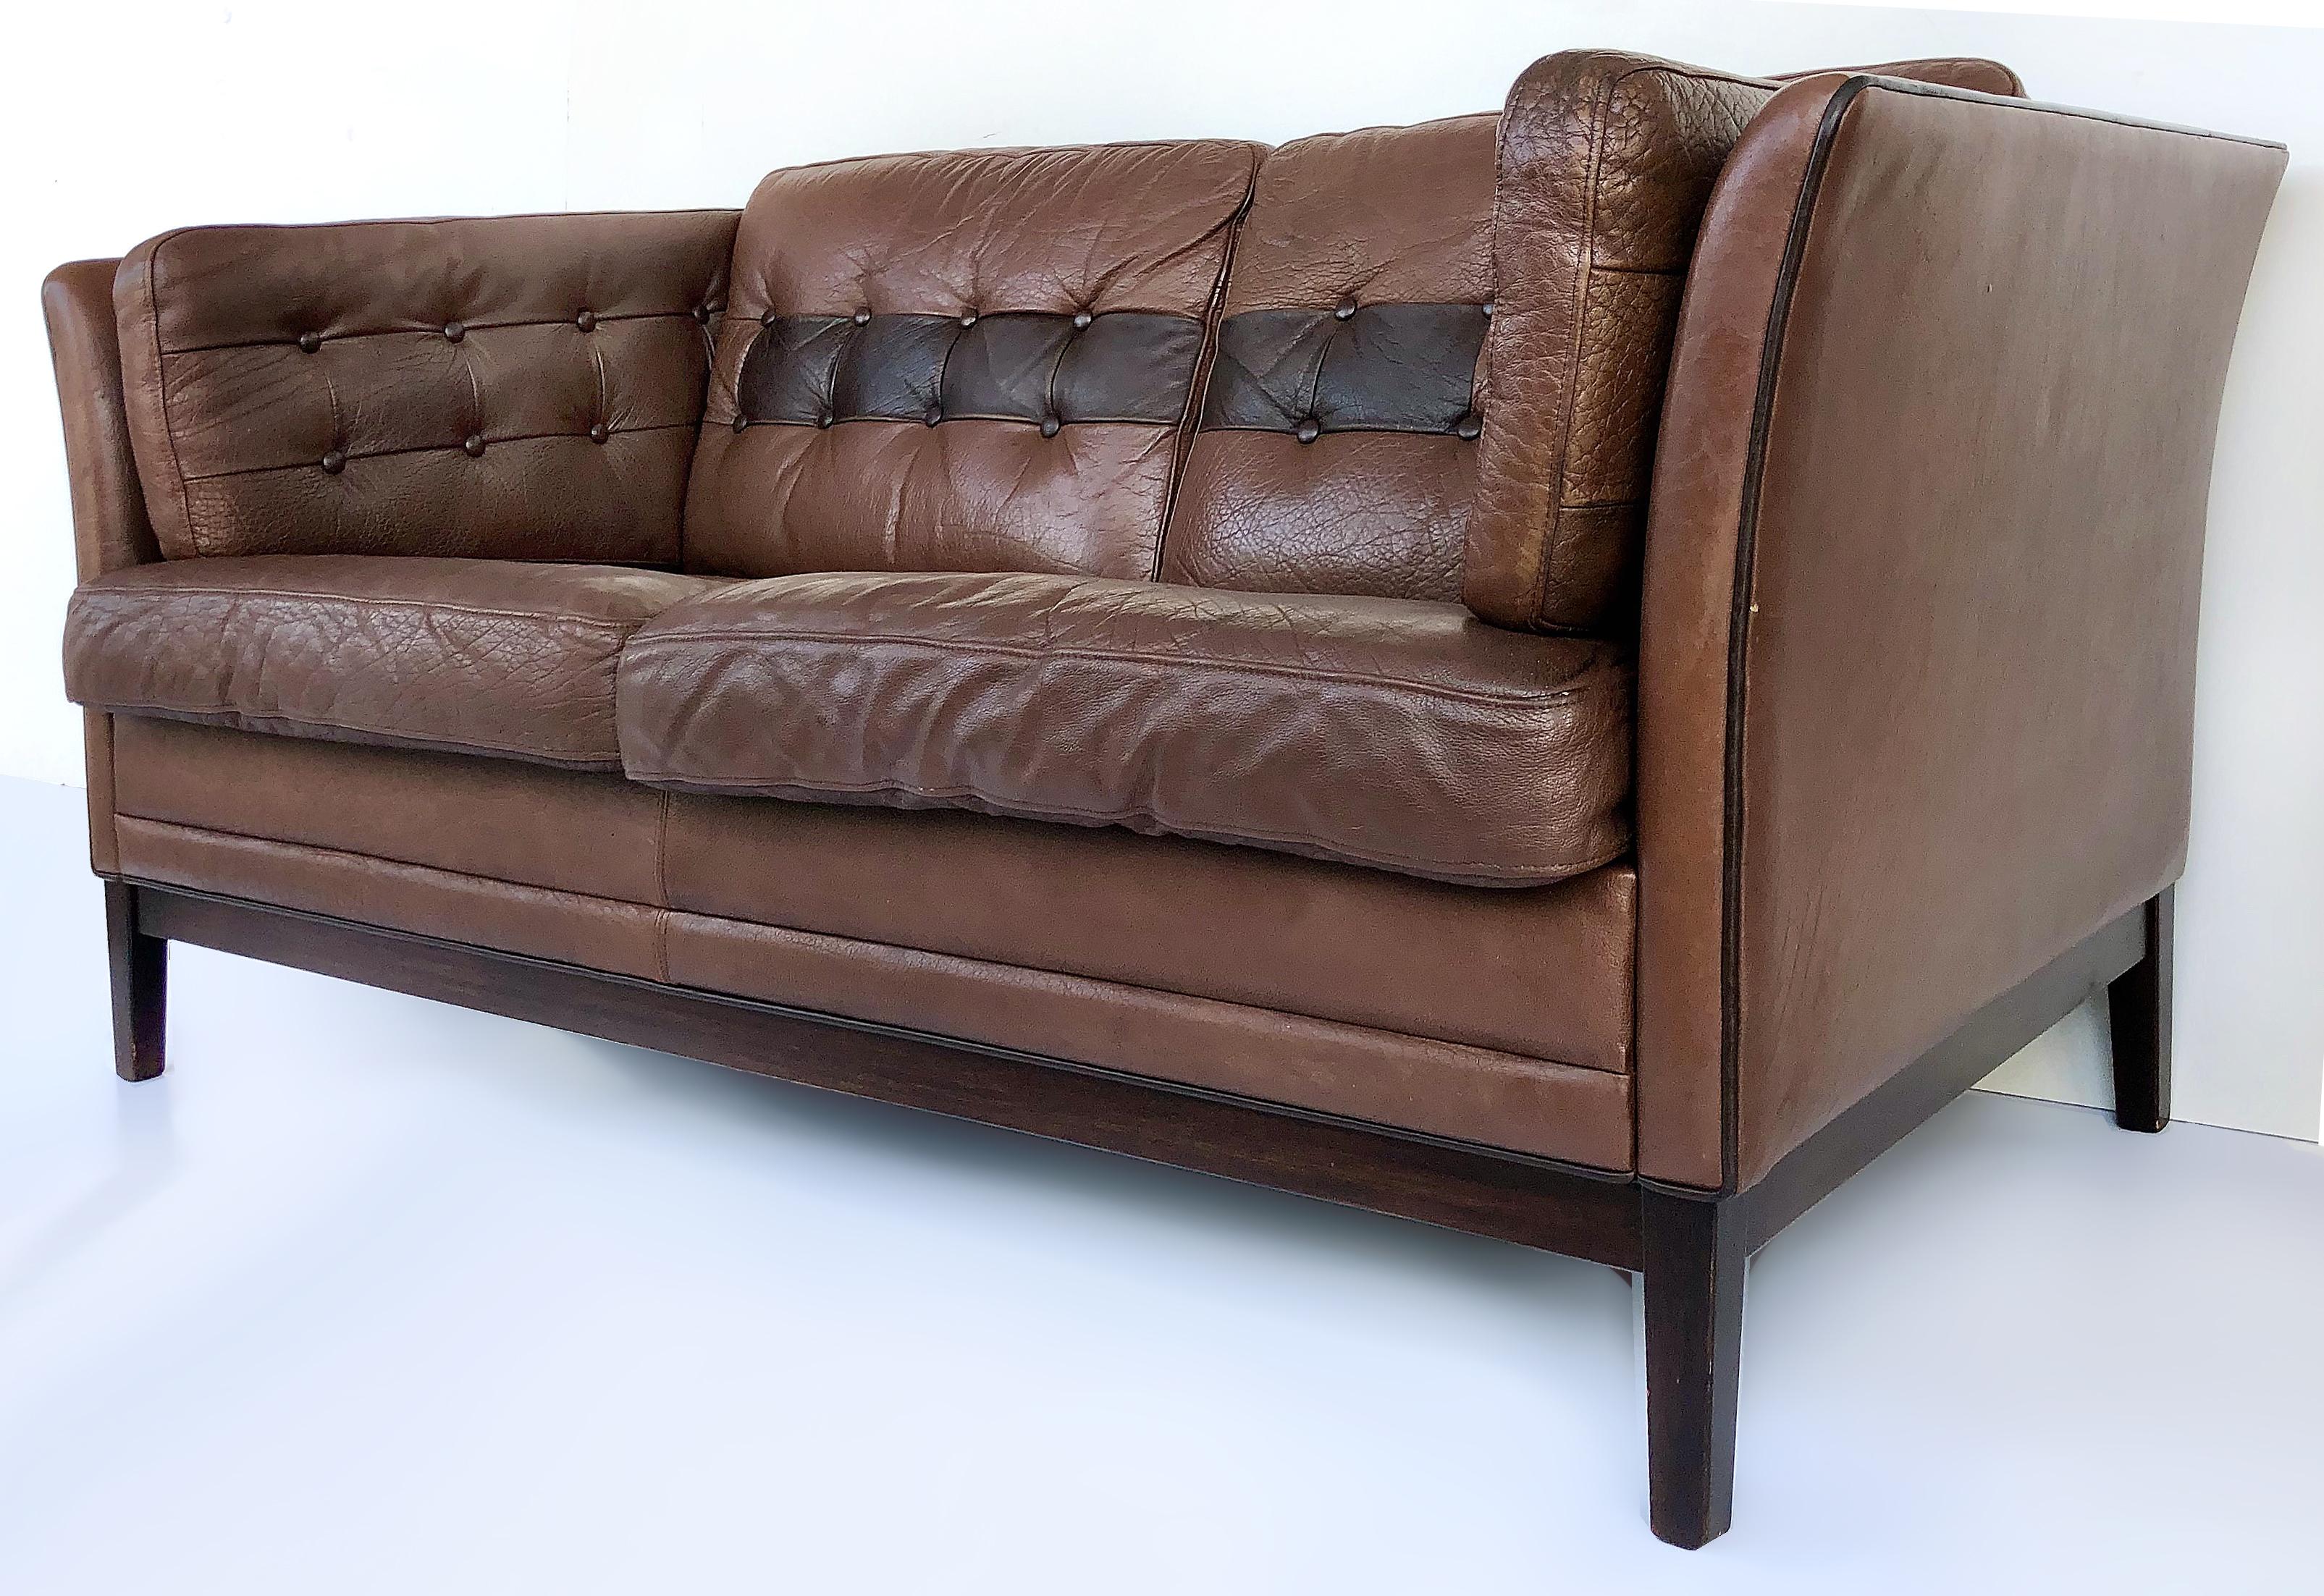 Scandinavian Modern leather and rosewood settee, 1970s

Offered for sale is an elegant and timeless 1970s Danish Modern tufted leather and Brazilian Rosewood settee created in the manner of Borge Mogensen. The settee has 6 loose cushions that have